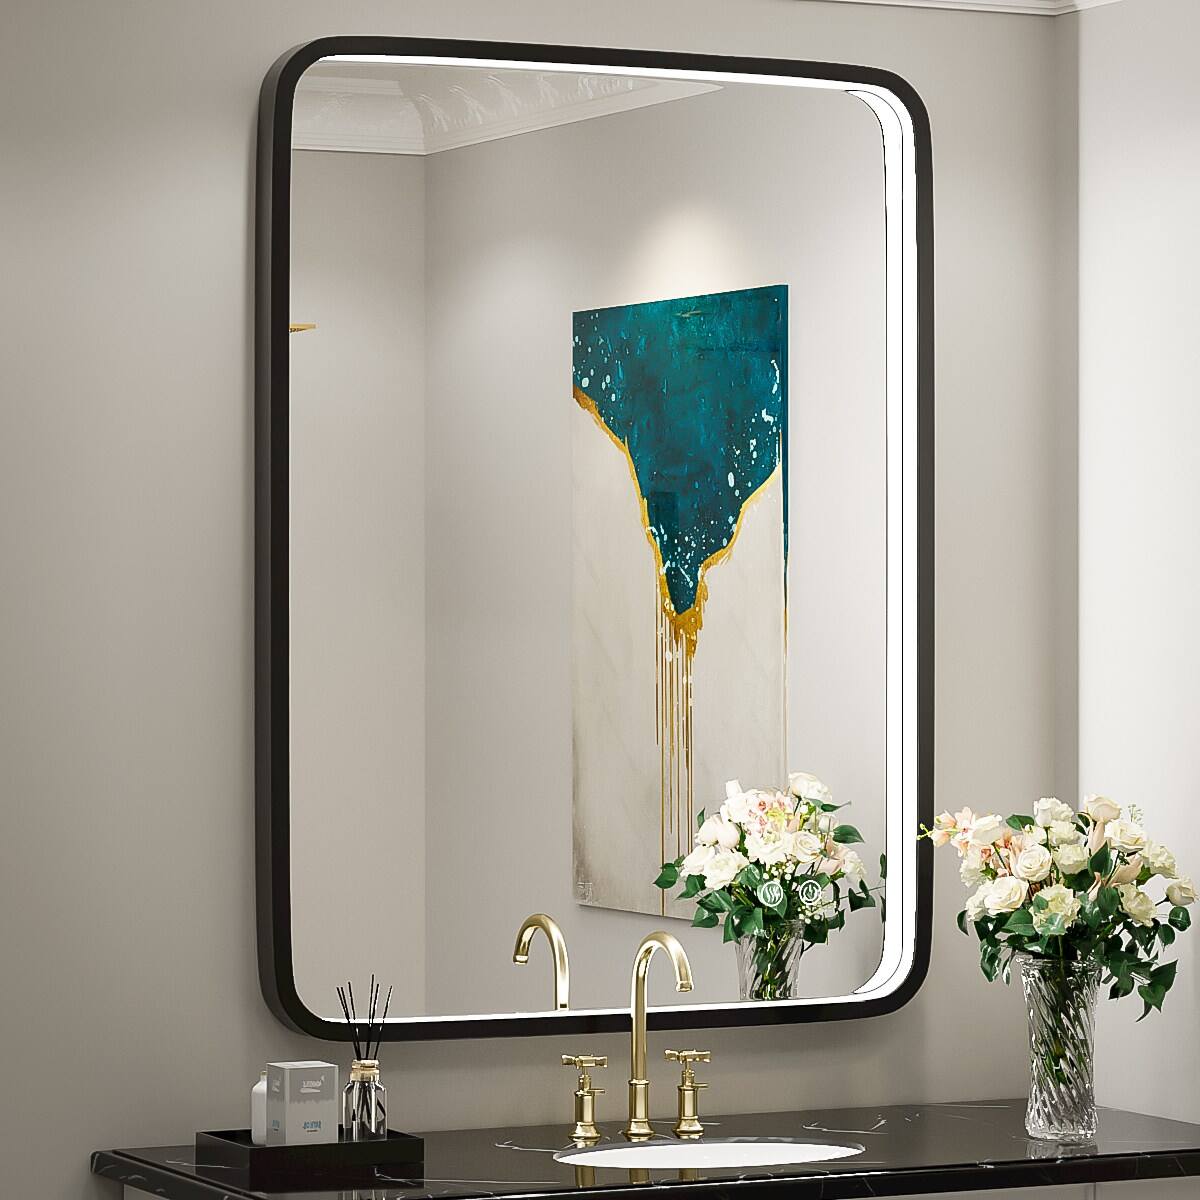 JJGullit bathroom mirror supplier 24x32 Inch LED Mirror, Black Metal Framed Bathroom Mirror with Lights, Wall Mounted Front Lighted Vanity Mirrors, Rectangle Beveled Edge Memory Dimmable Anti-Fog Horizont